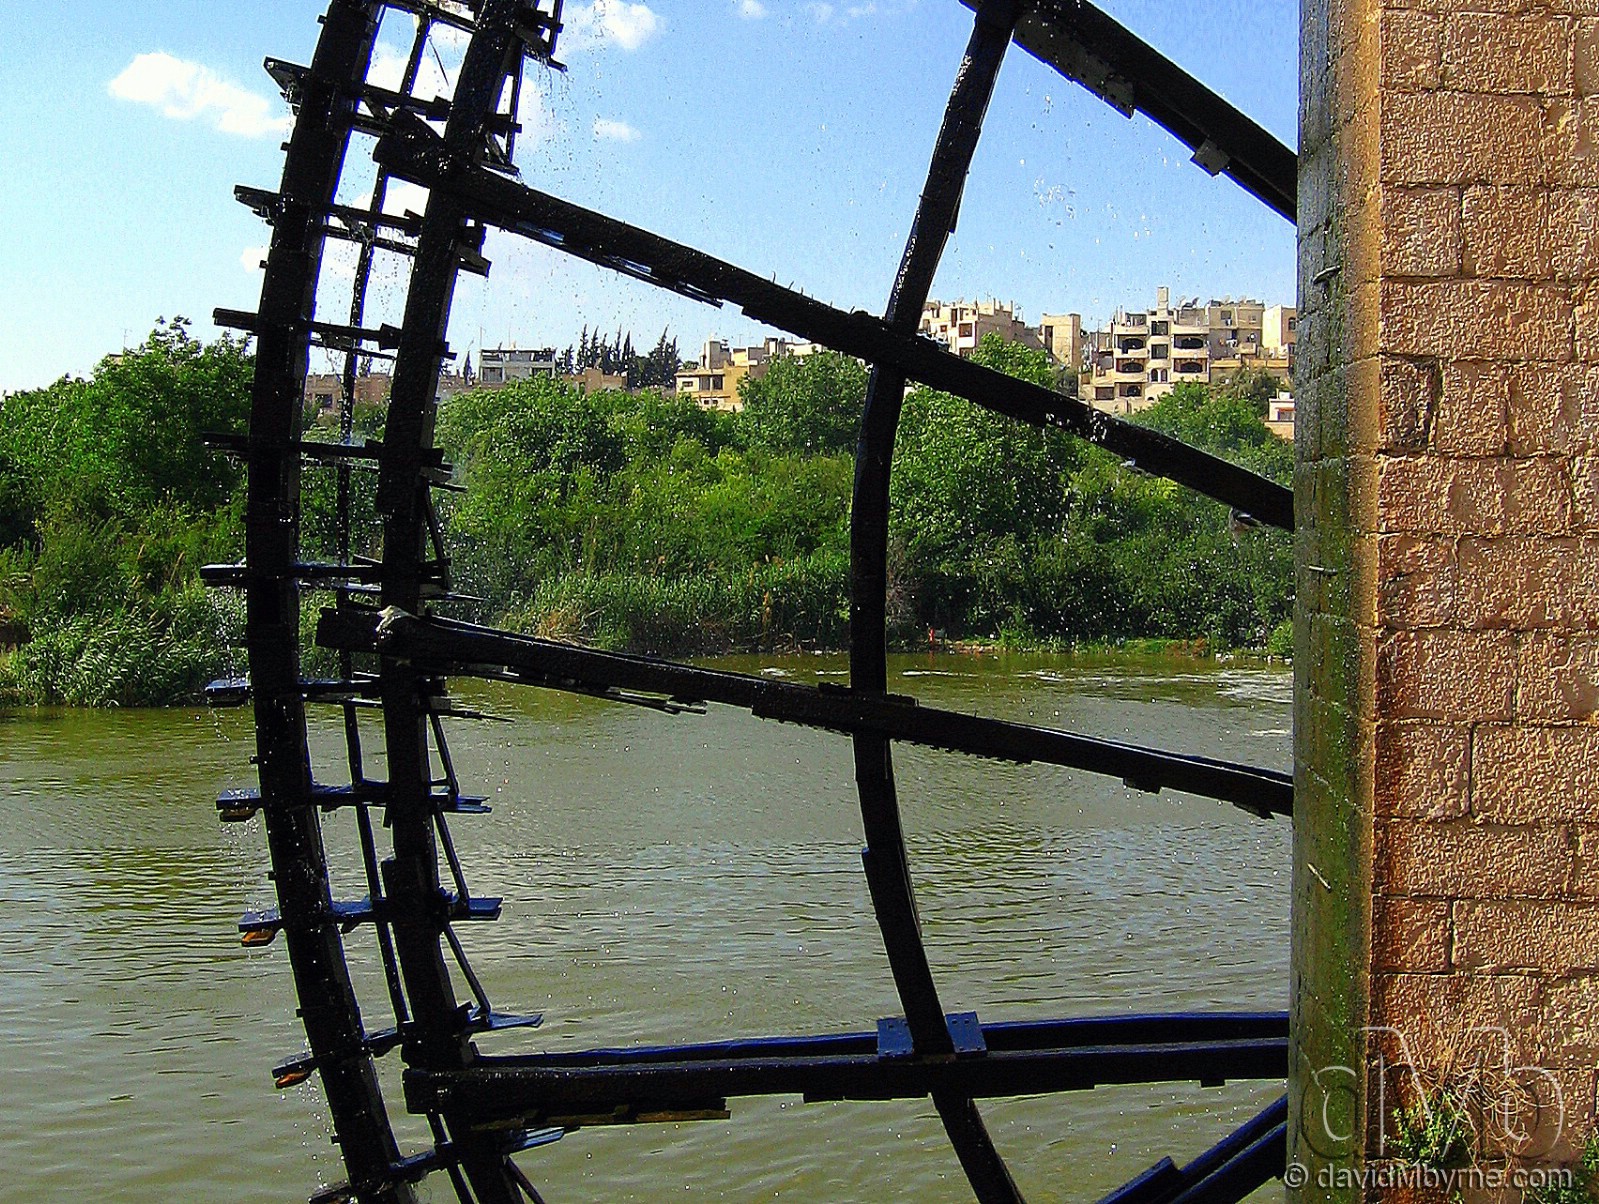 One of the 17 remaining norias (‘wheels of pots’) on the Orontes river in Hama, Syria. May 6th, 2008.